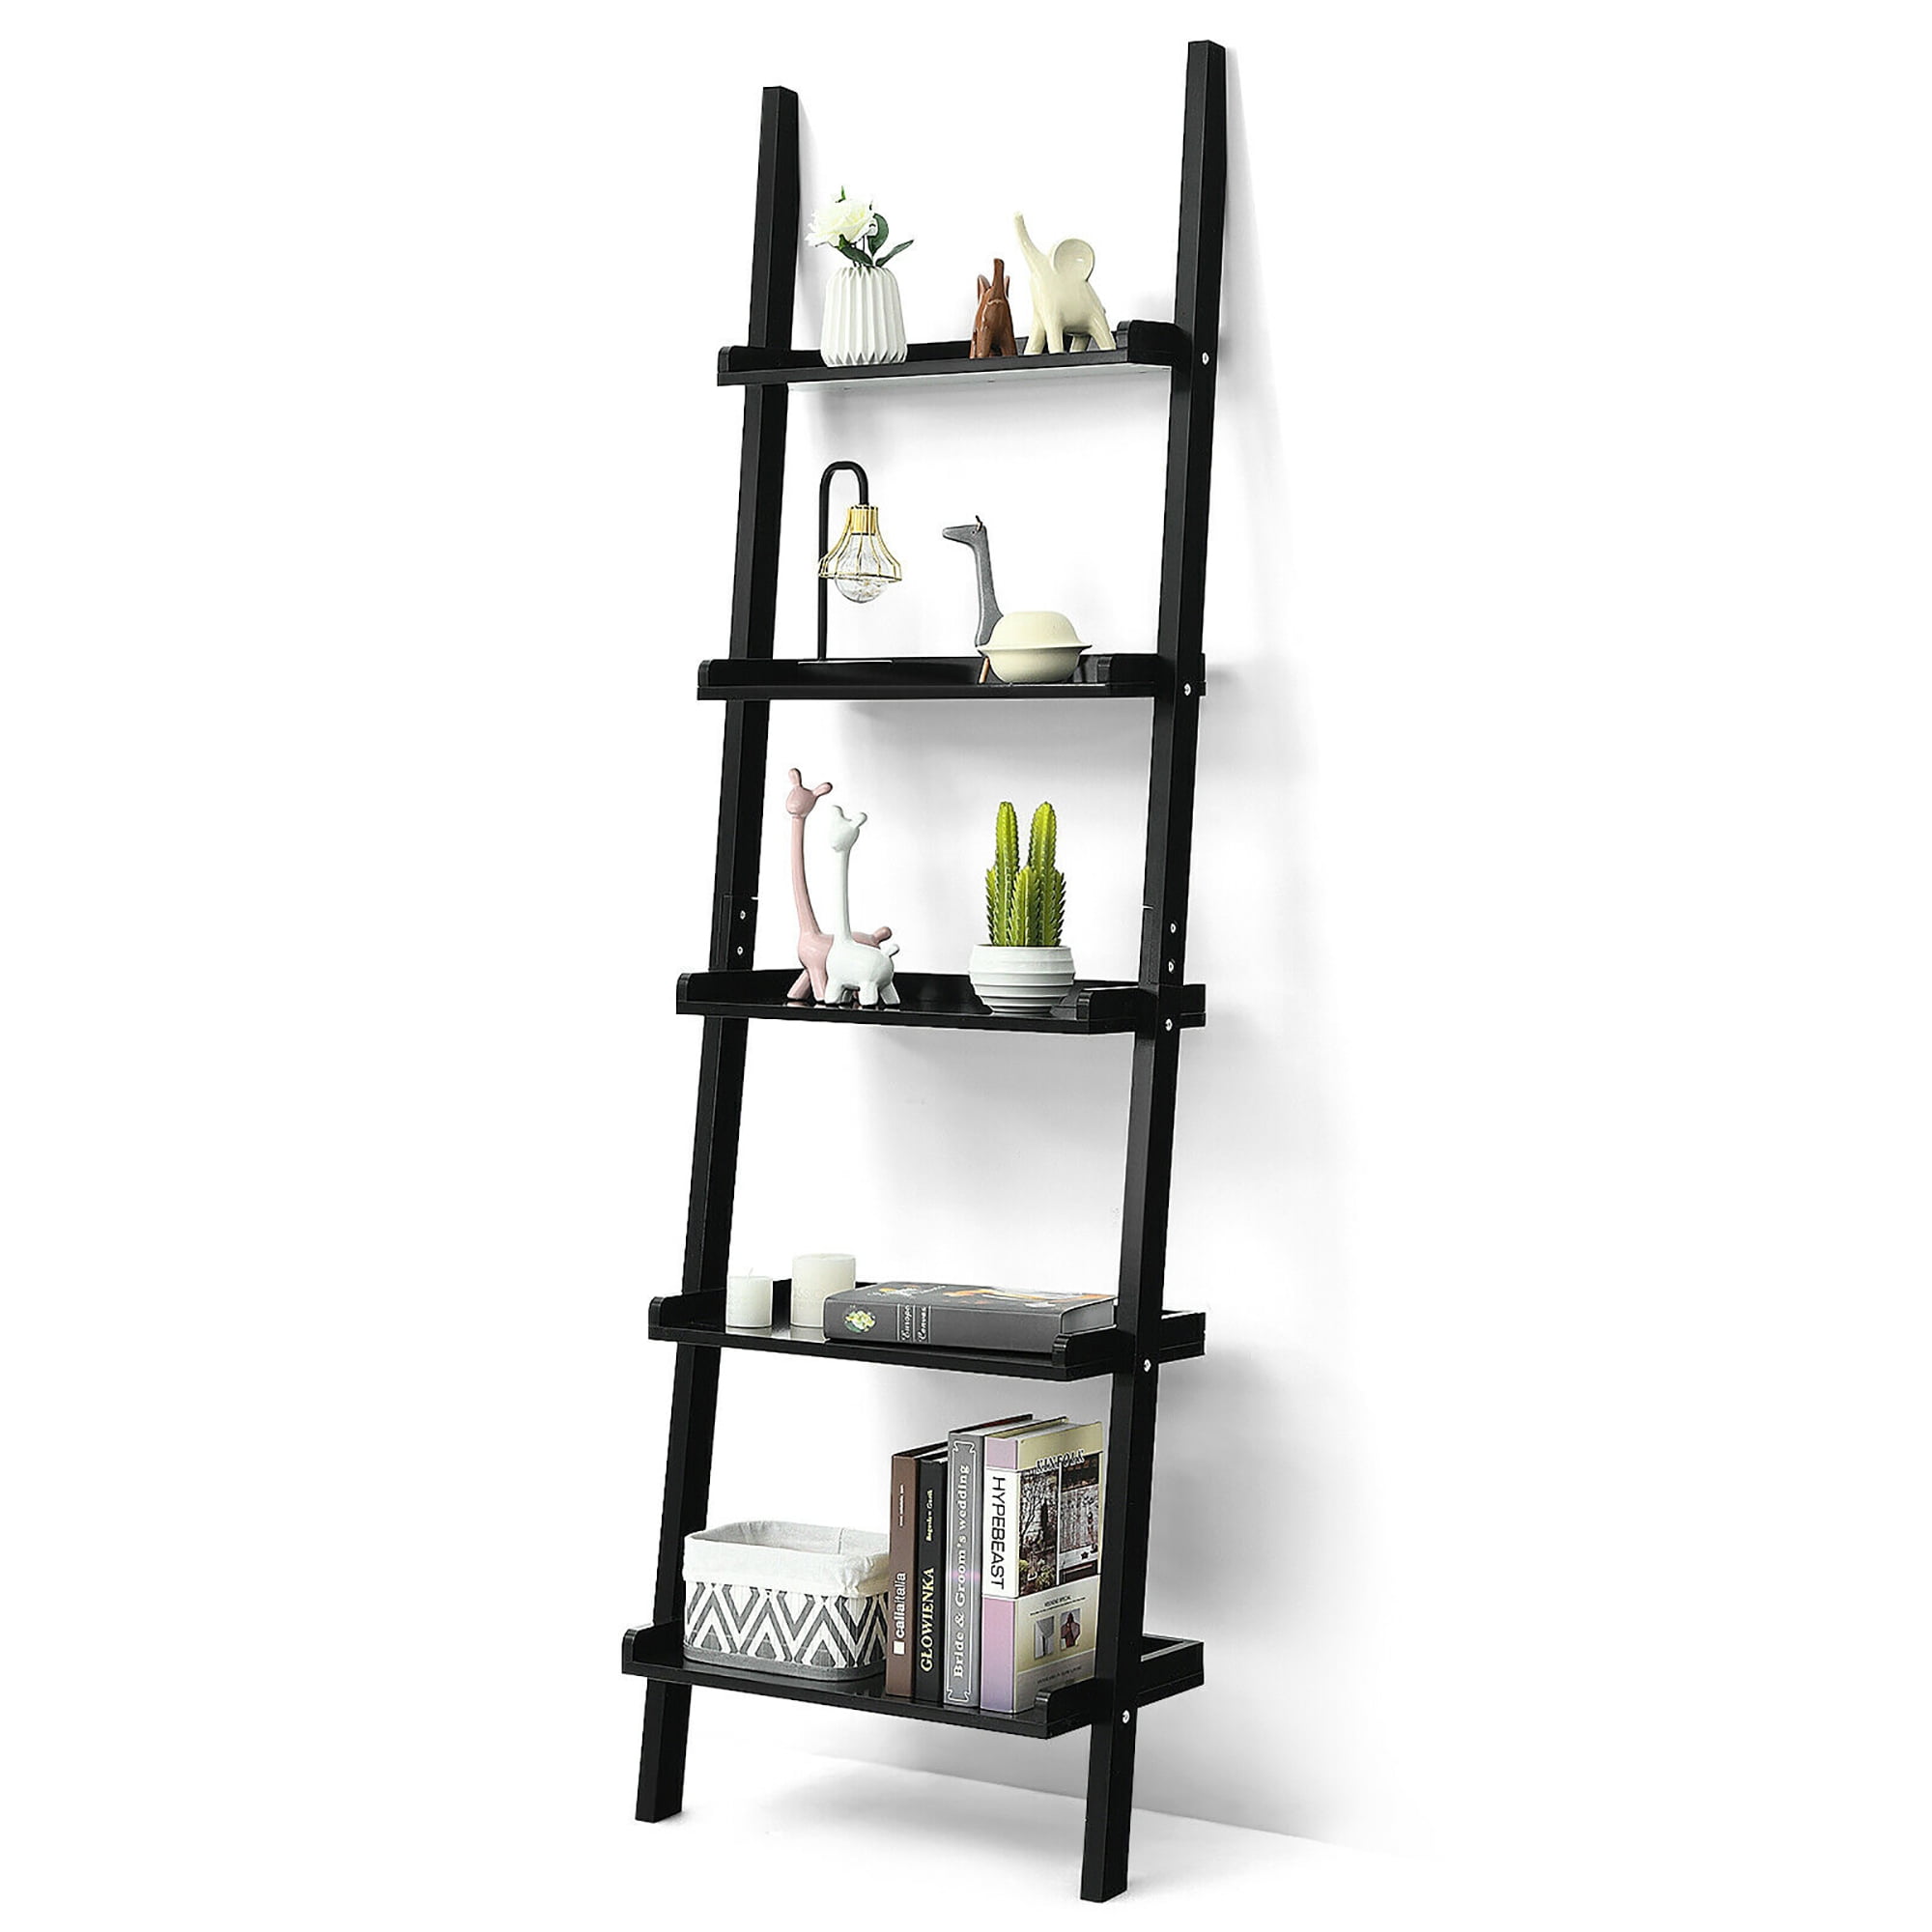 COSTWAY Wall Ladder Shelf Home Office Storage Unit Organiser Display Rack for Living Room Bedroom Brown + White 5 Tiers Bookcase Plant Flower Stand